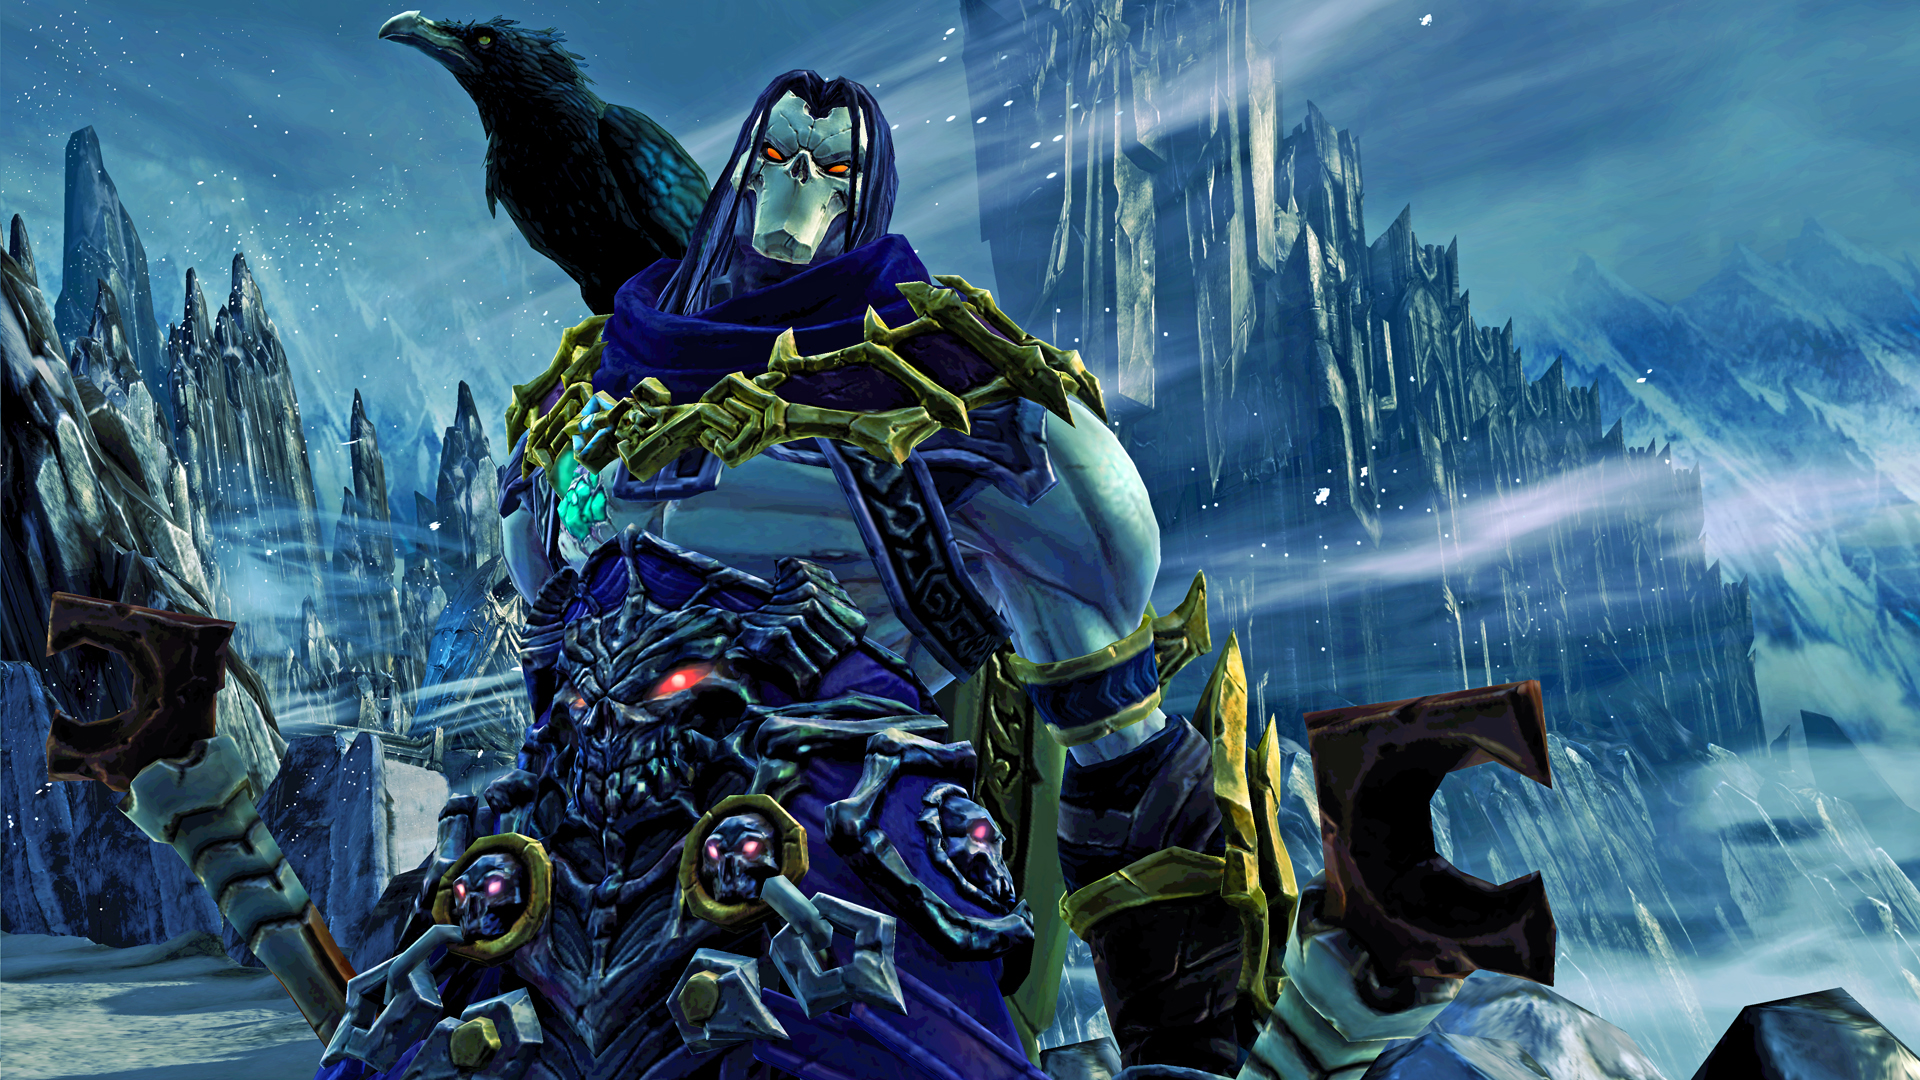 Play as Death in Darksiders II on your Android tablet via OnLive today